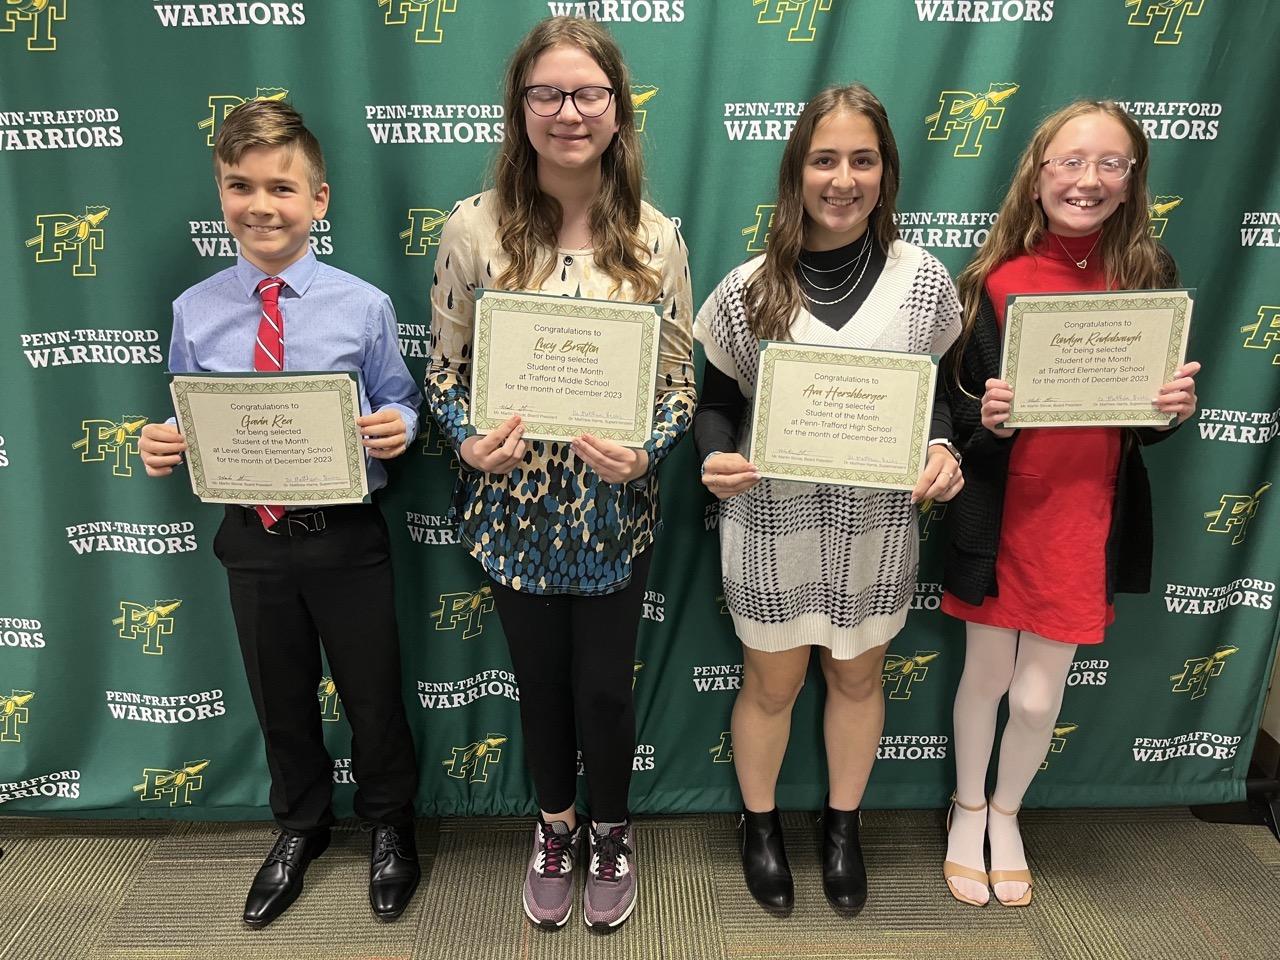 December Students of the Month Gavin Rea, Lucy Bratton, Ava Hershberger, and Londyn Radabaugh